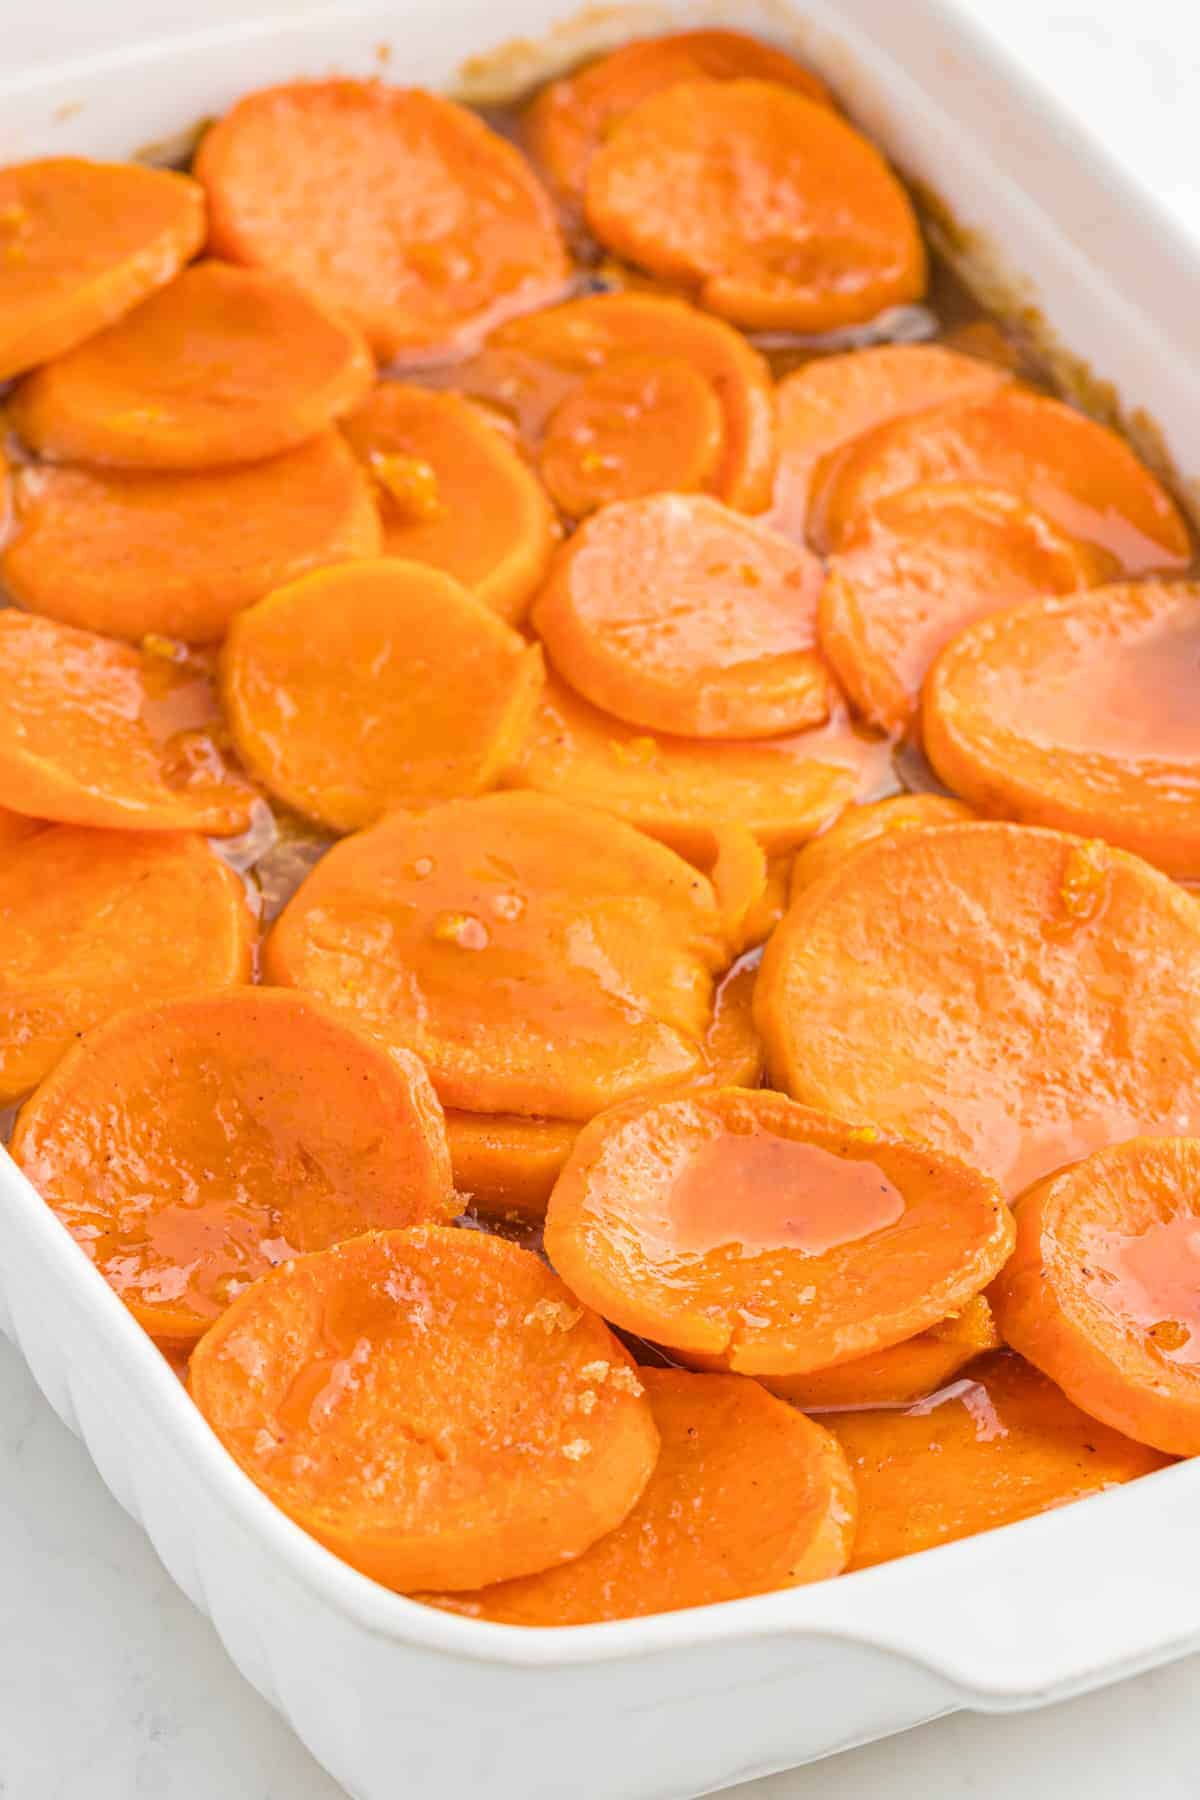 A white baking dish of sliced candied yams in syrup